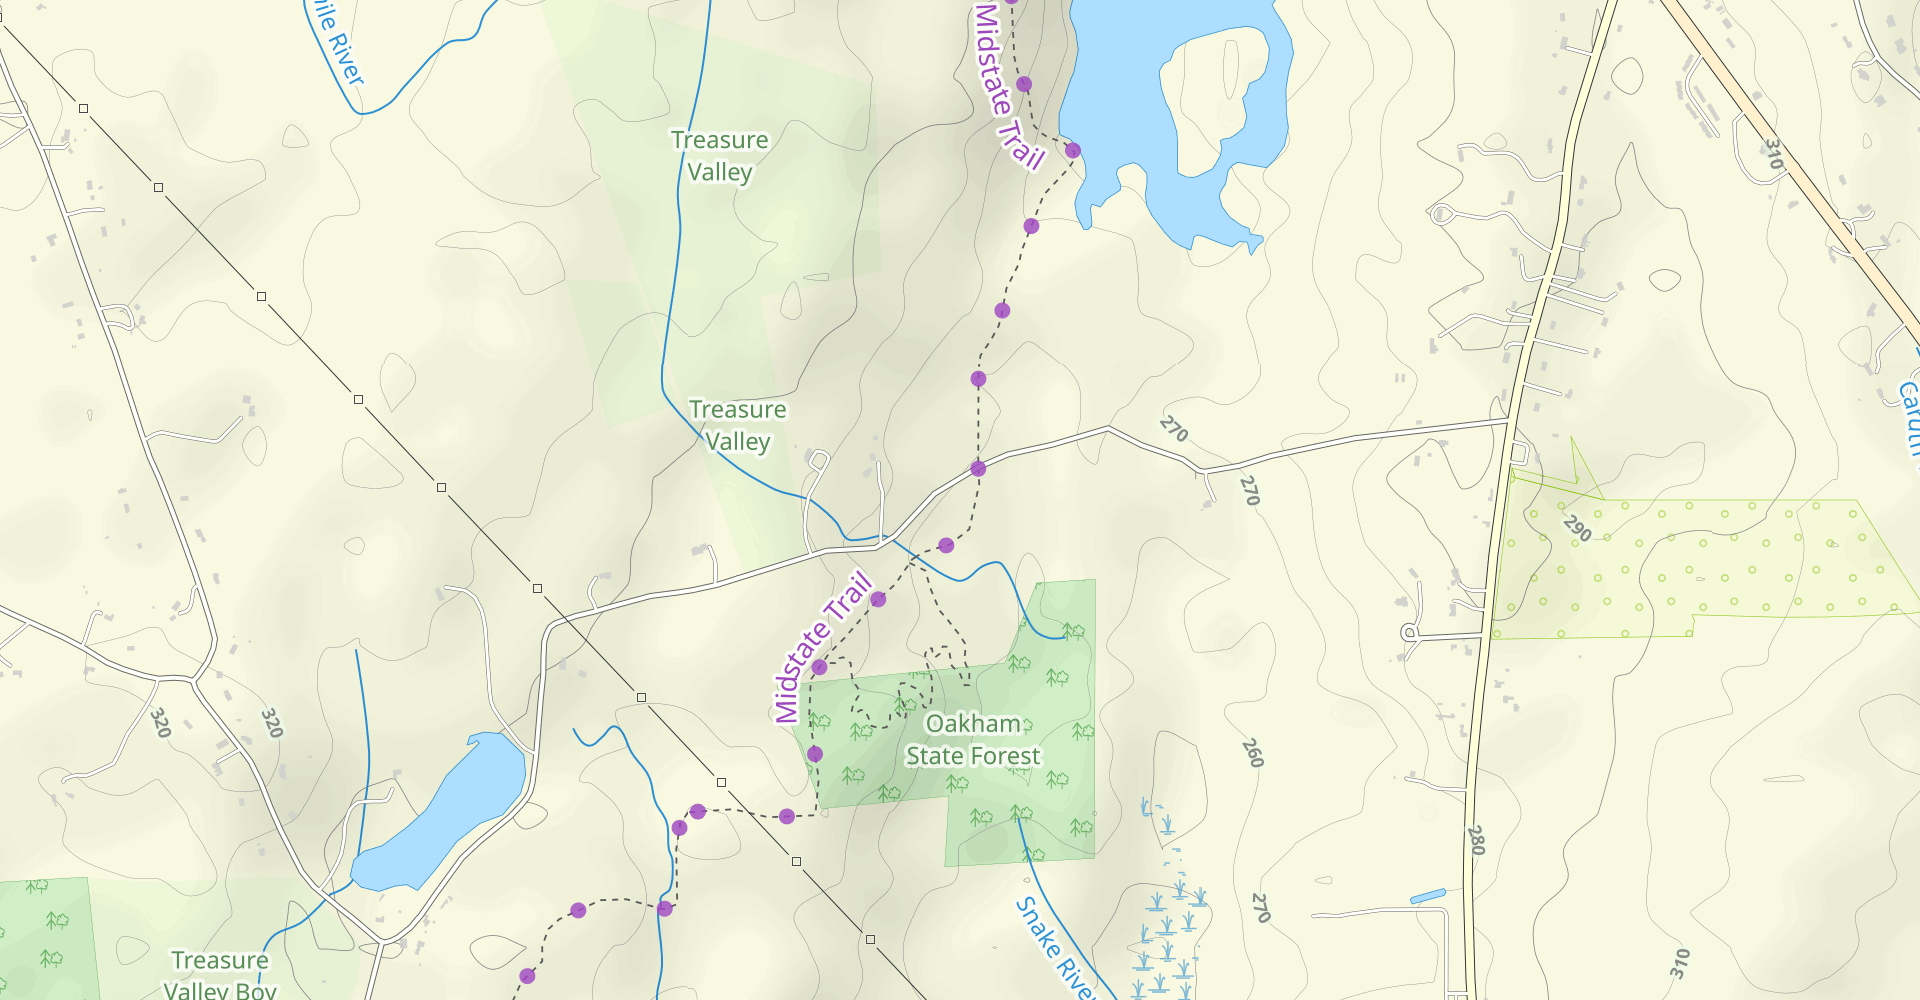 Midstate Trail: East Hill Road, Rutland to 4H Camp, Spencer